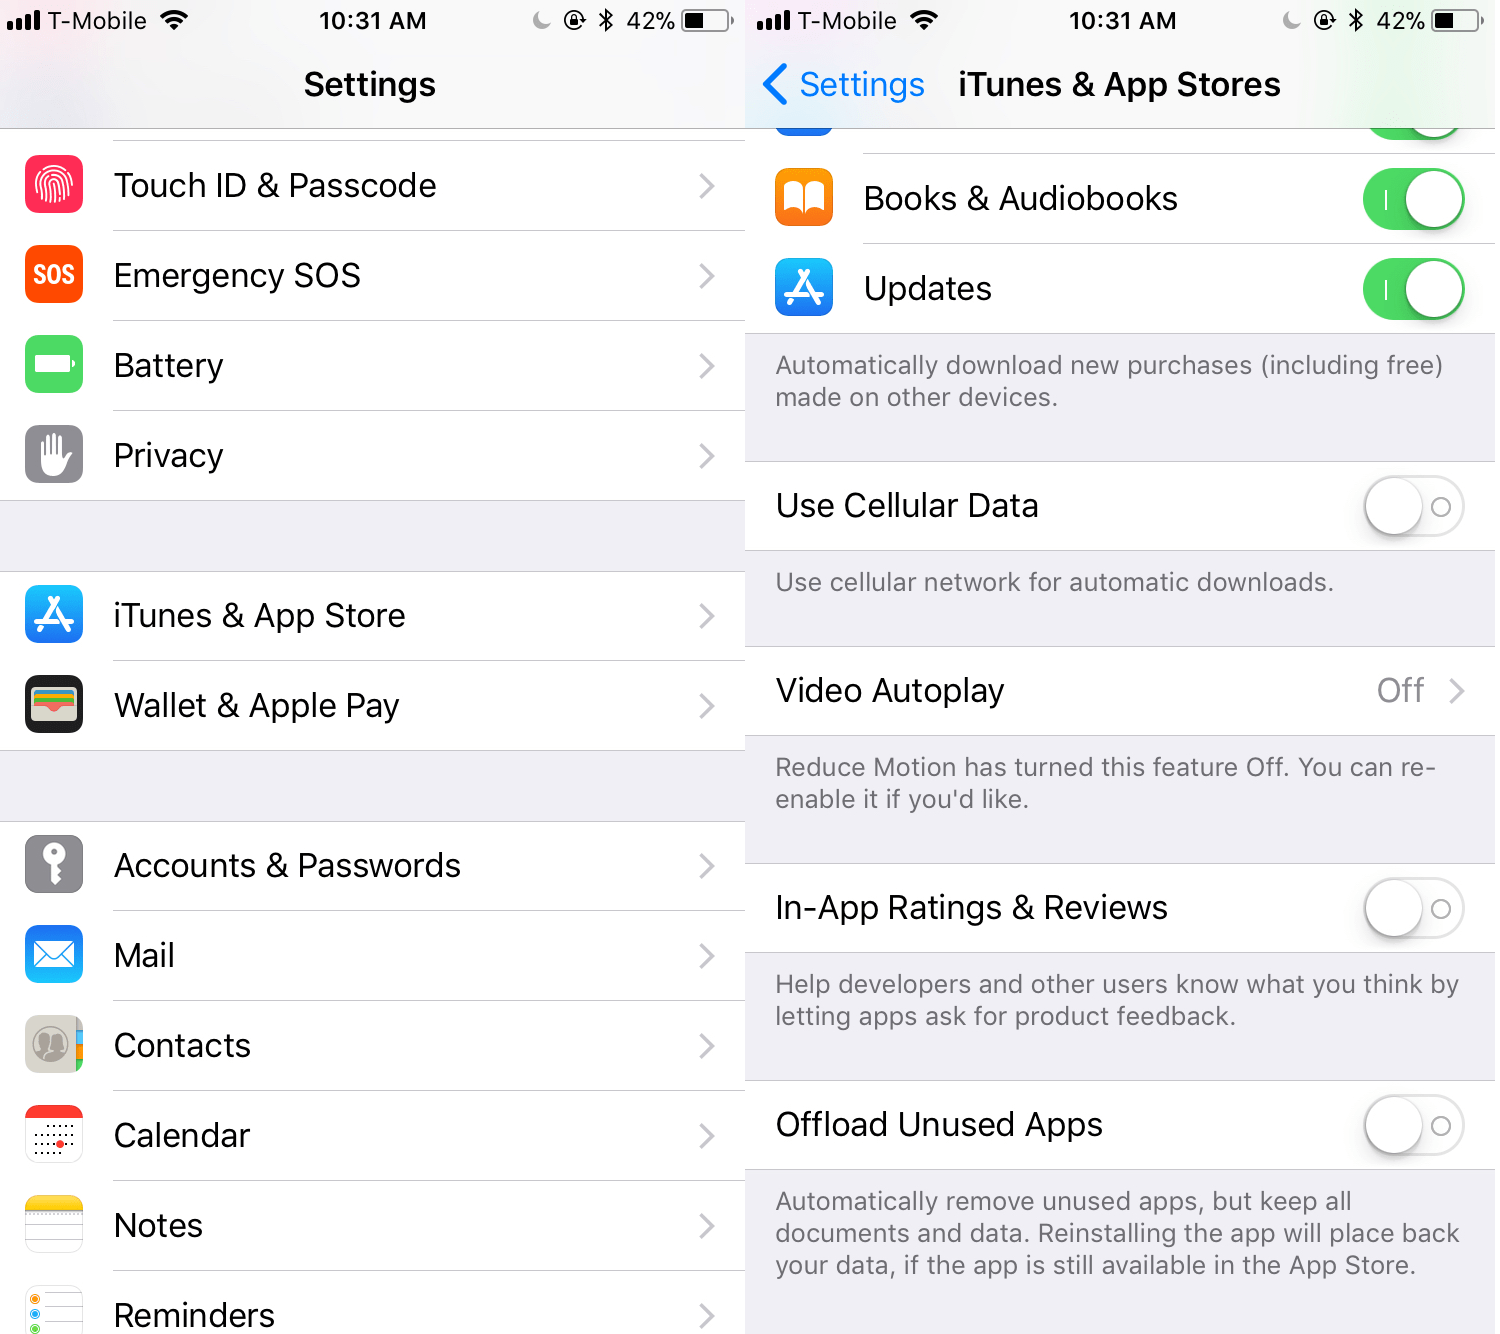 How To Turn Off App Ratings Requests In iOS 11